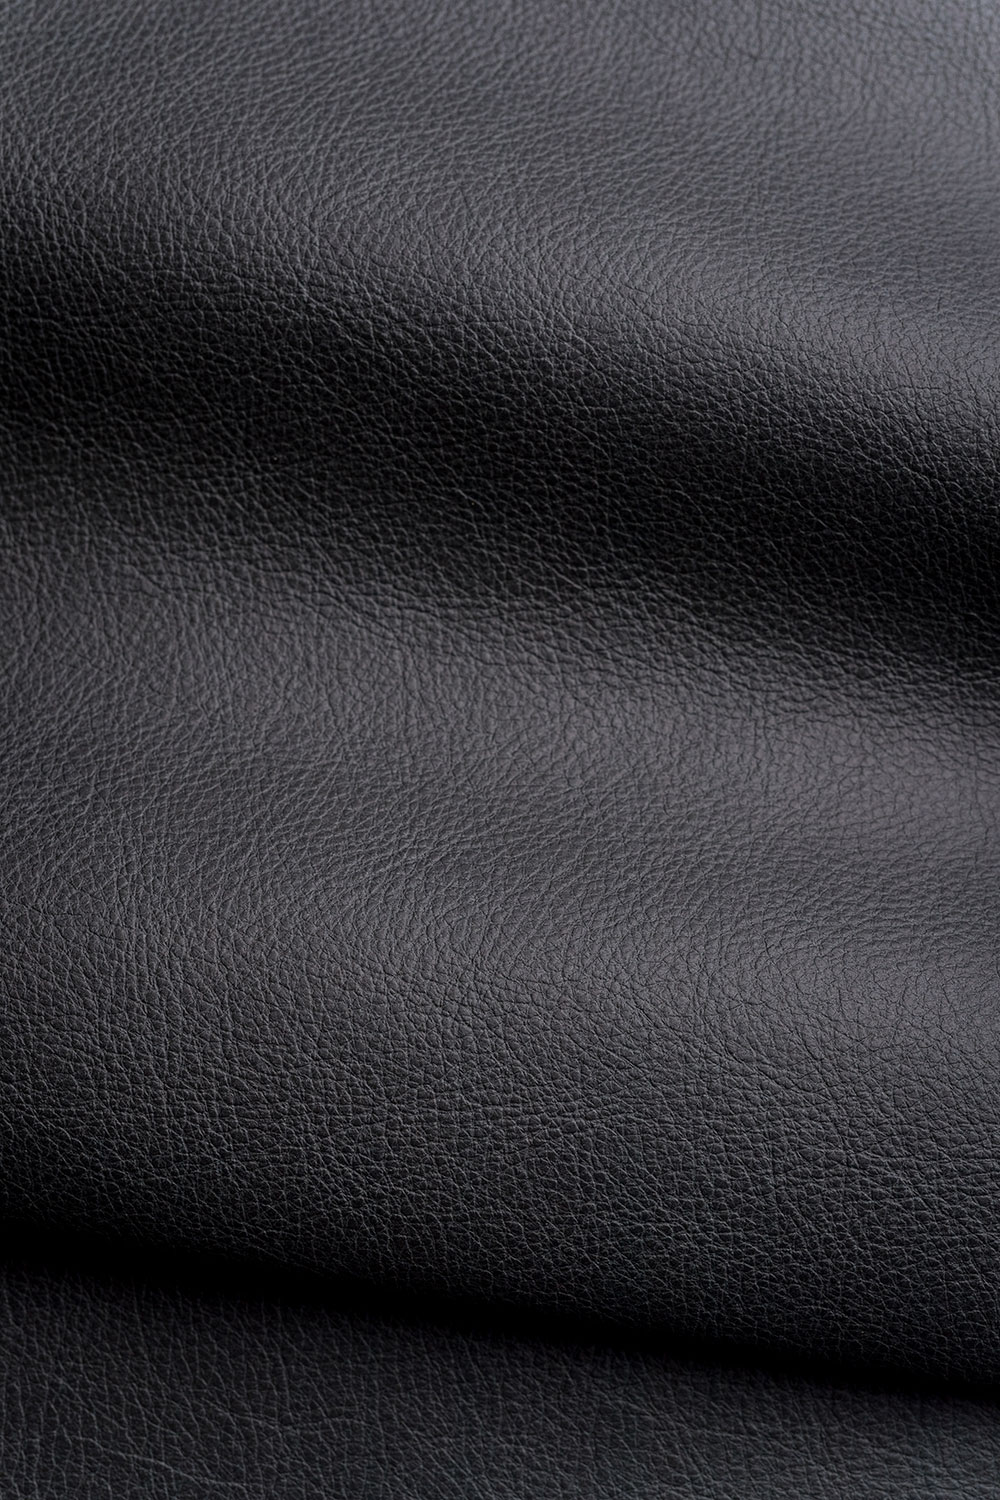 Genuine Leather Upholstery Fabric, Black Leather Upholstery Fabric